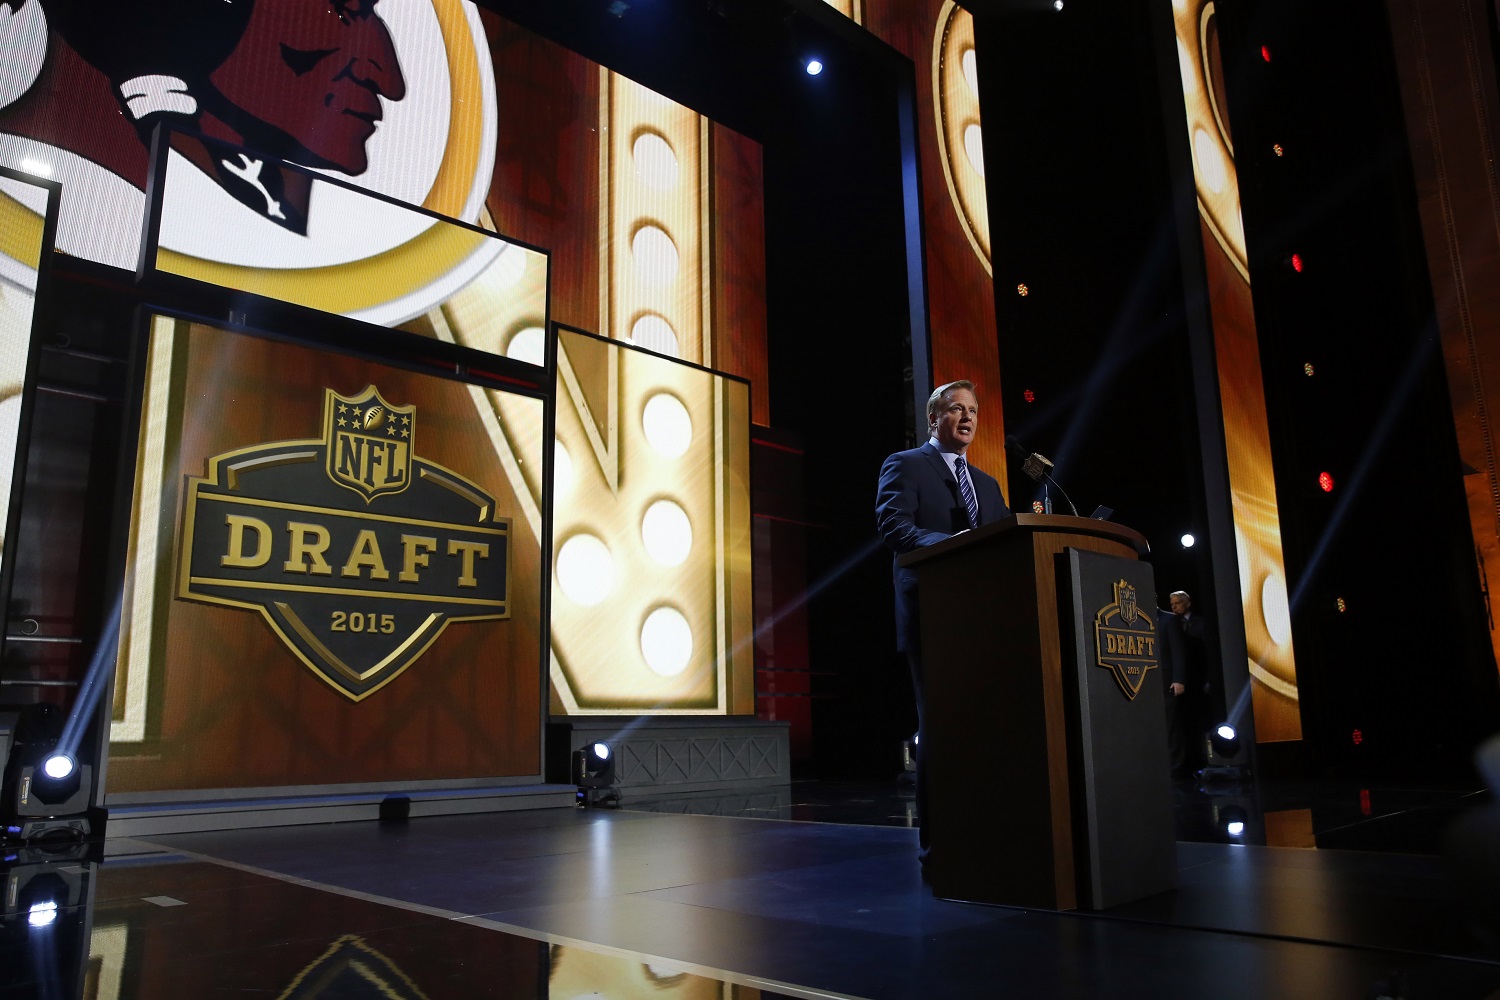 McCloughan looking to fill needs, expand draft pool